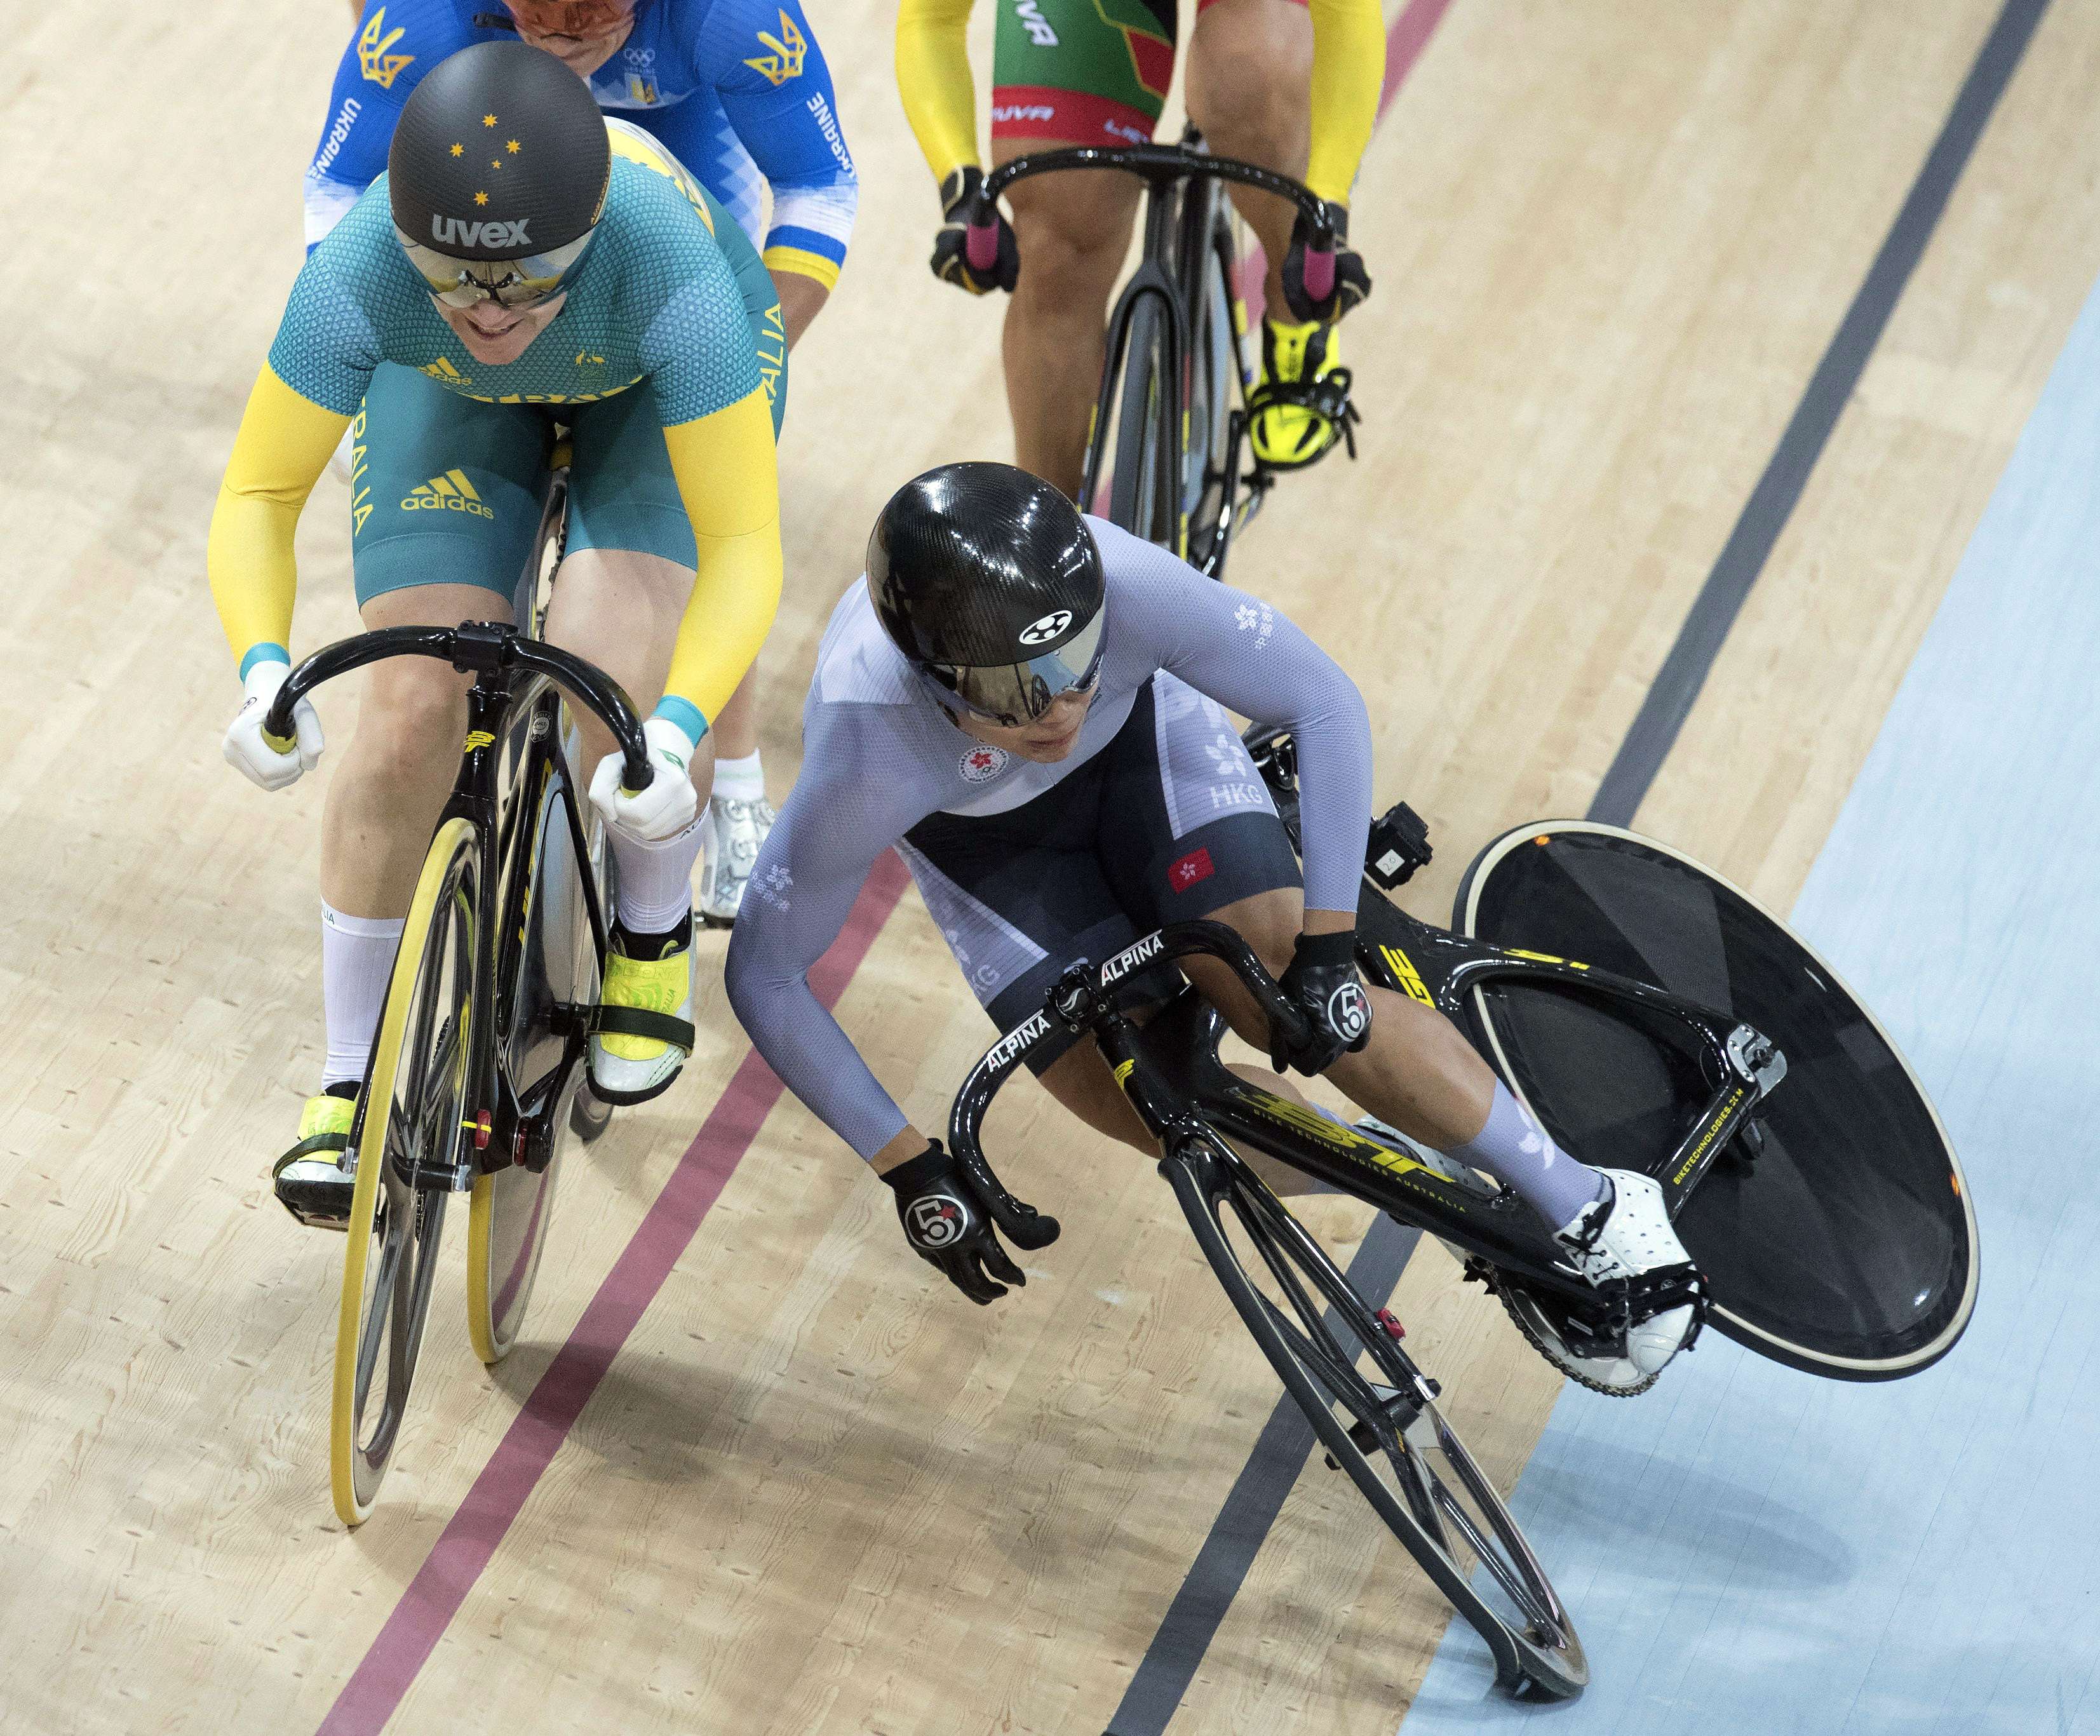 Sarah Lee crashes out of the keirin semi-finals at the Rio Olympic Velodrome. Photo: The Canadian Press via AP